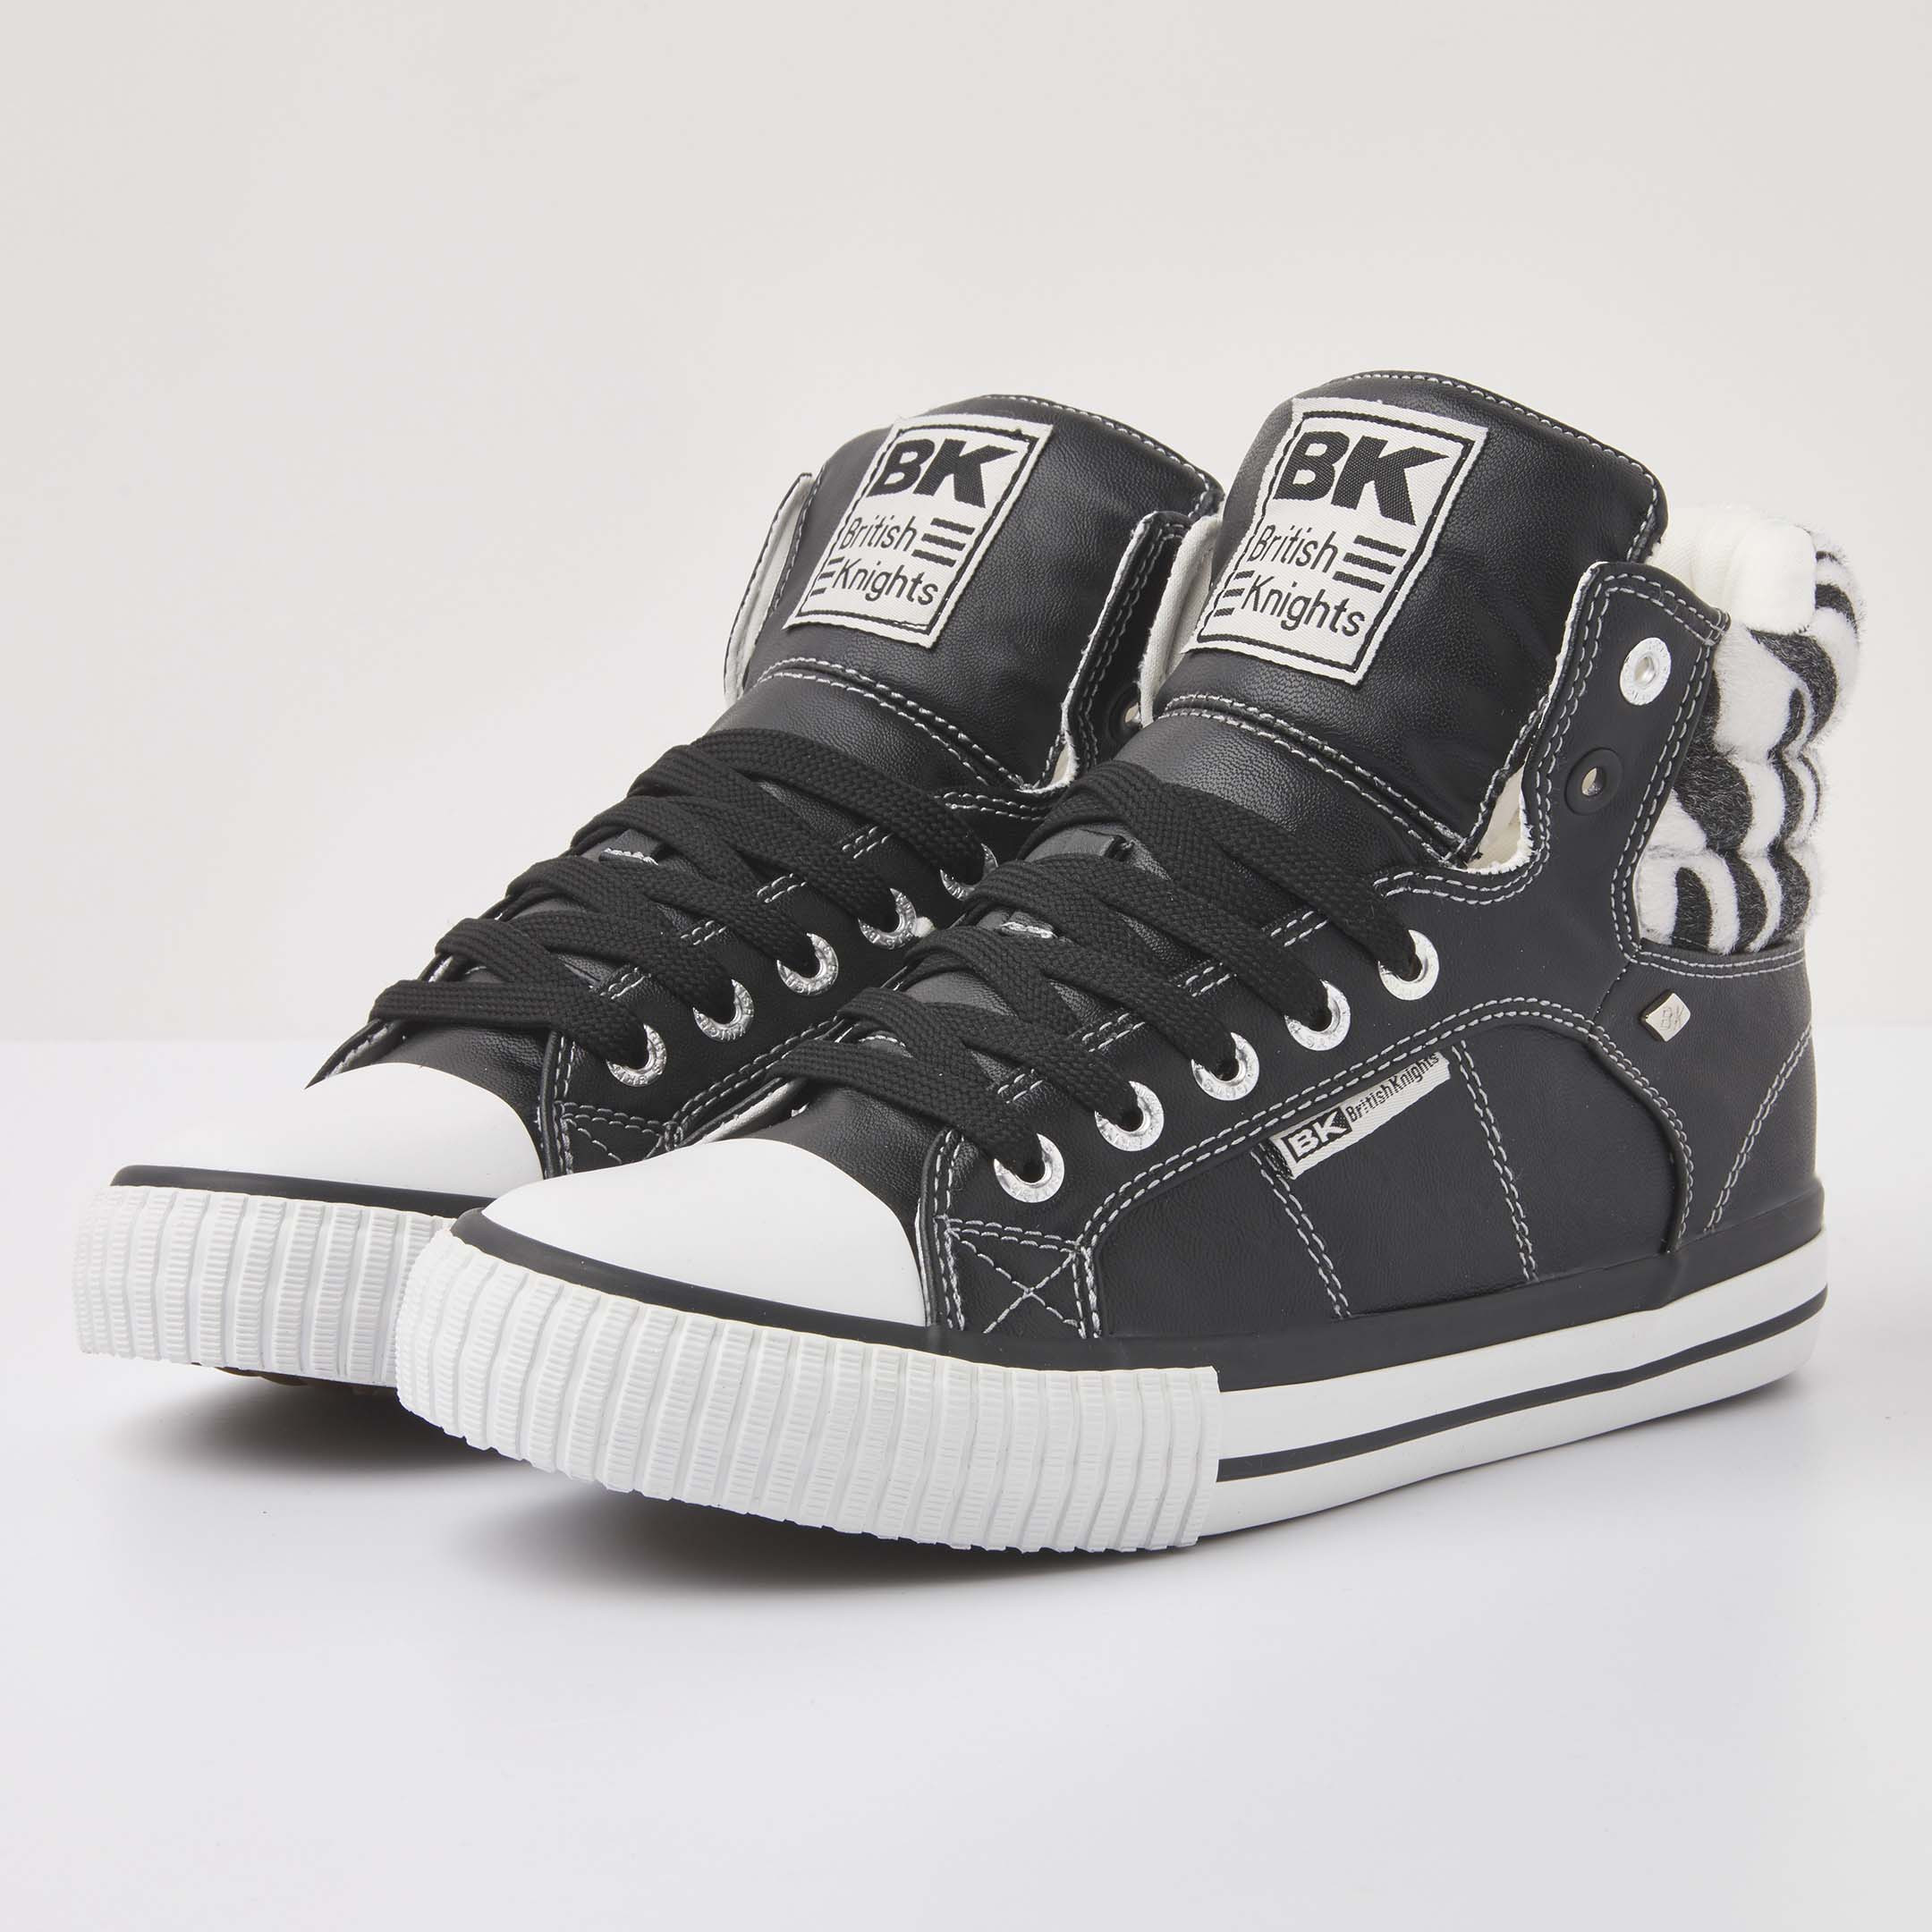 British Knights Sneaker Front view  B46-3721-01 ATOLL HIGH-TOP FEMALE